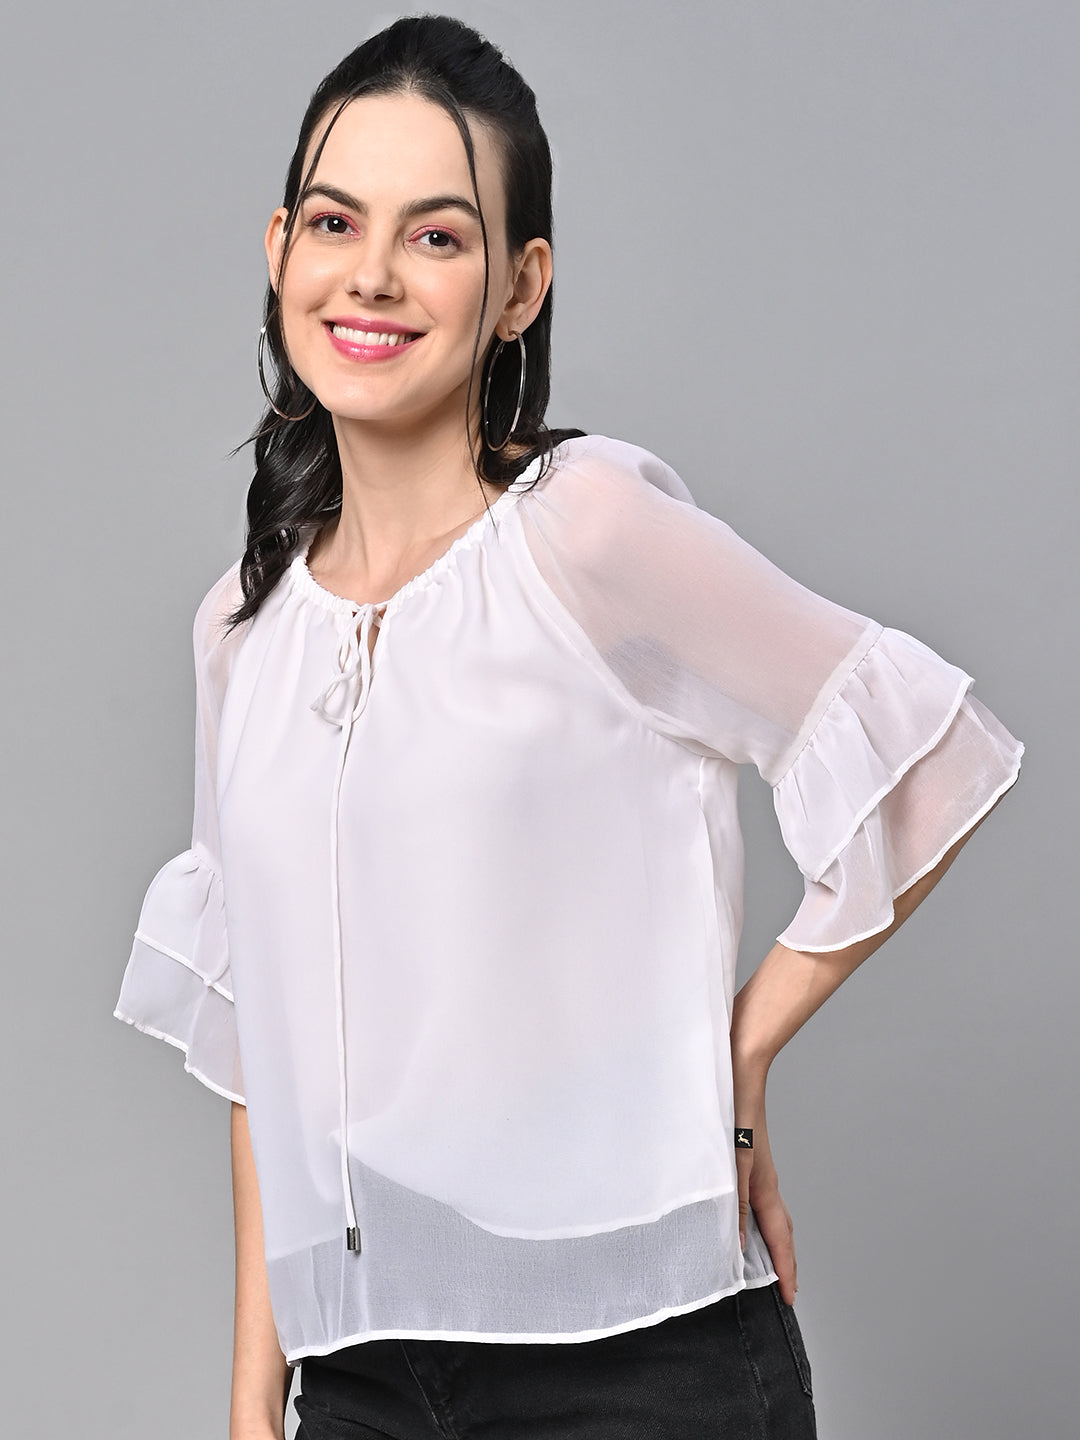 Valbone Women’s White Color Solid Top With Half-Sleeves